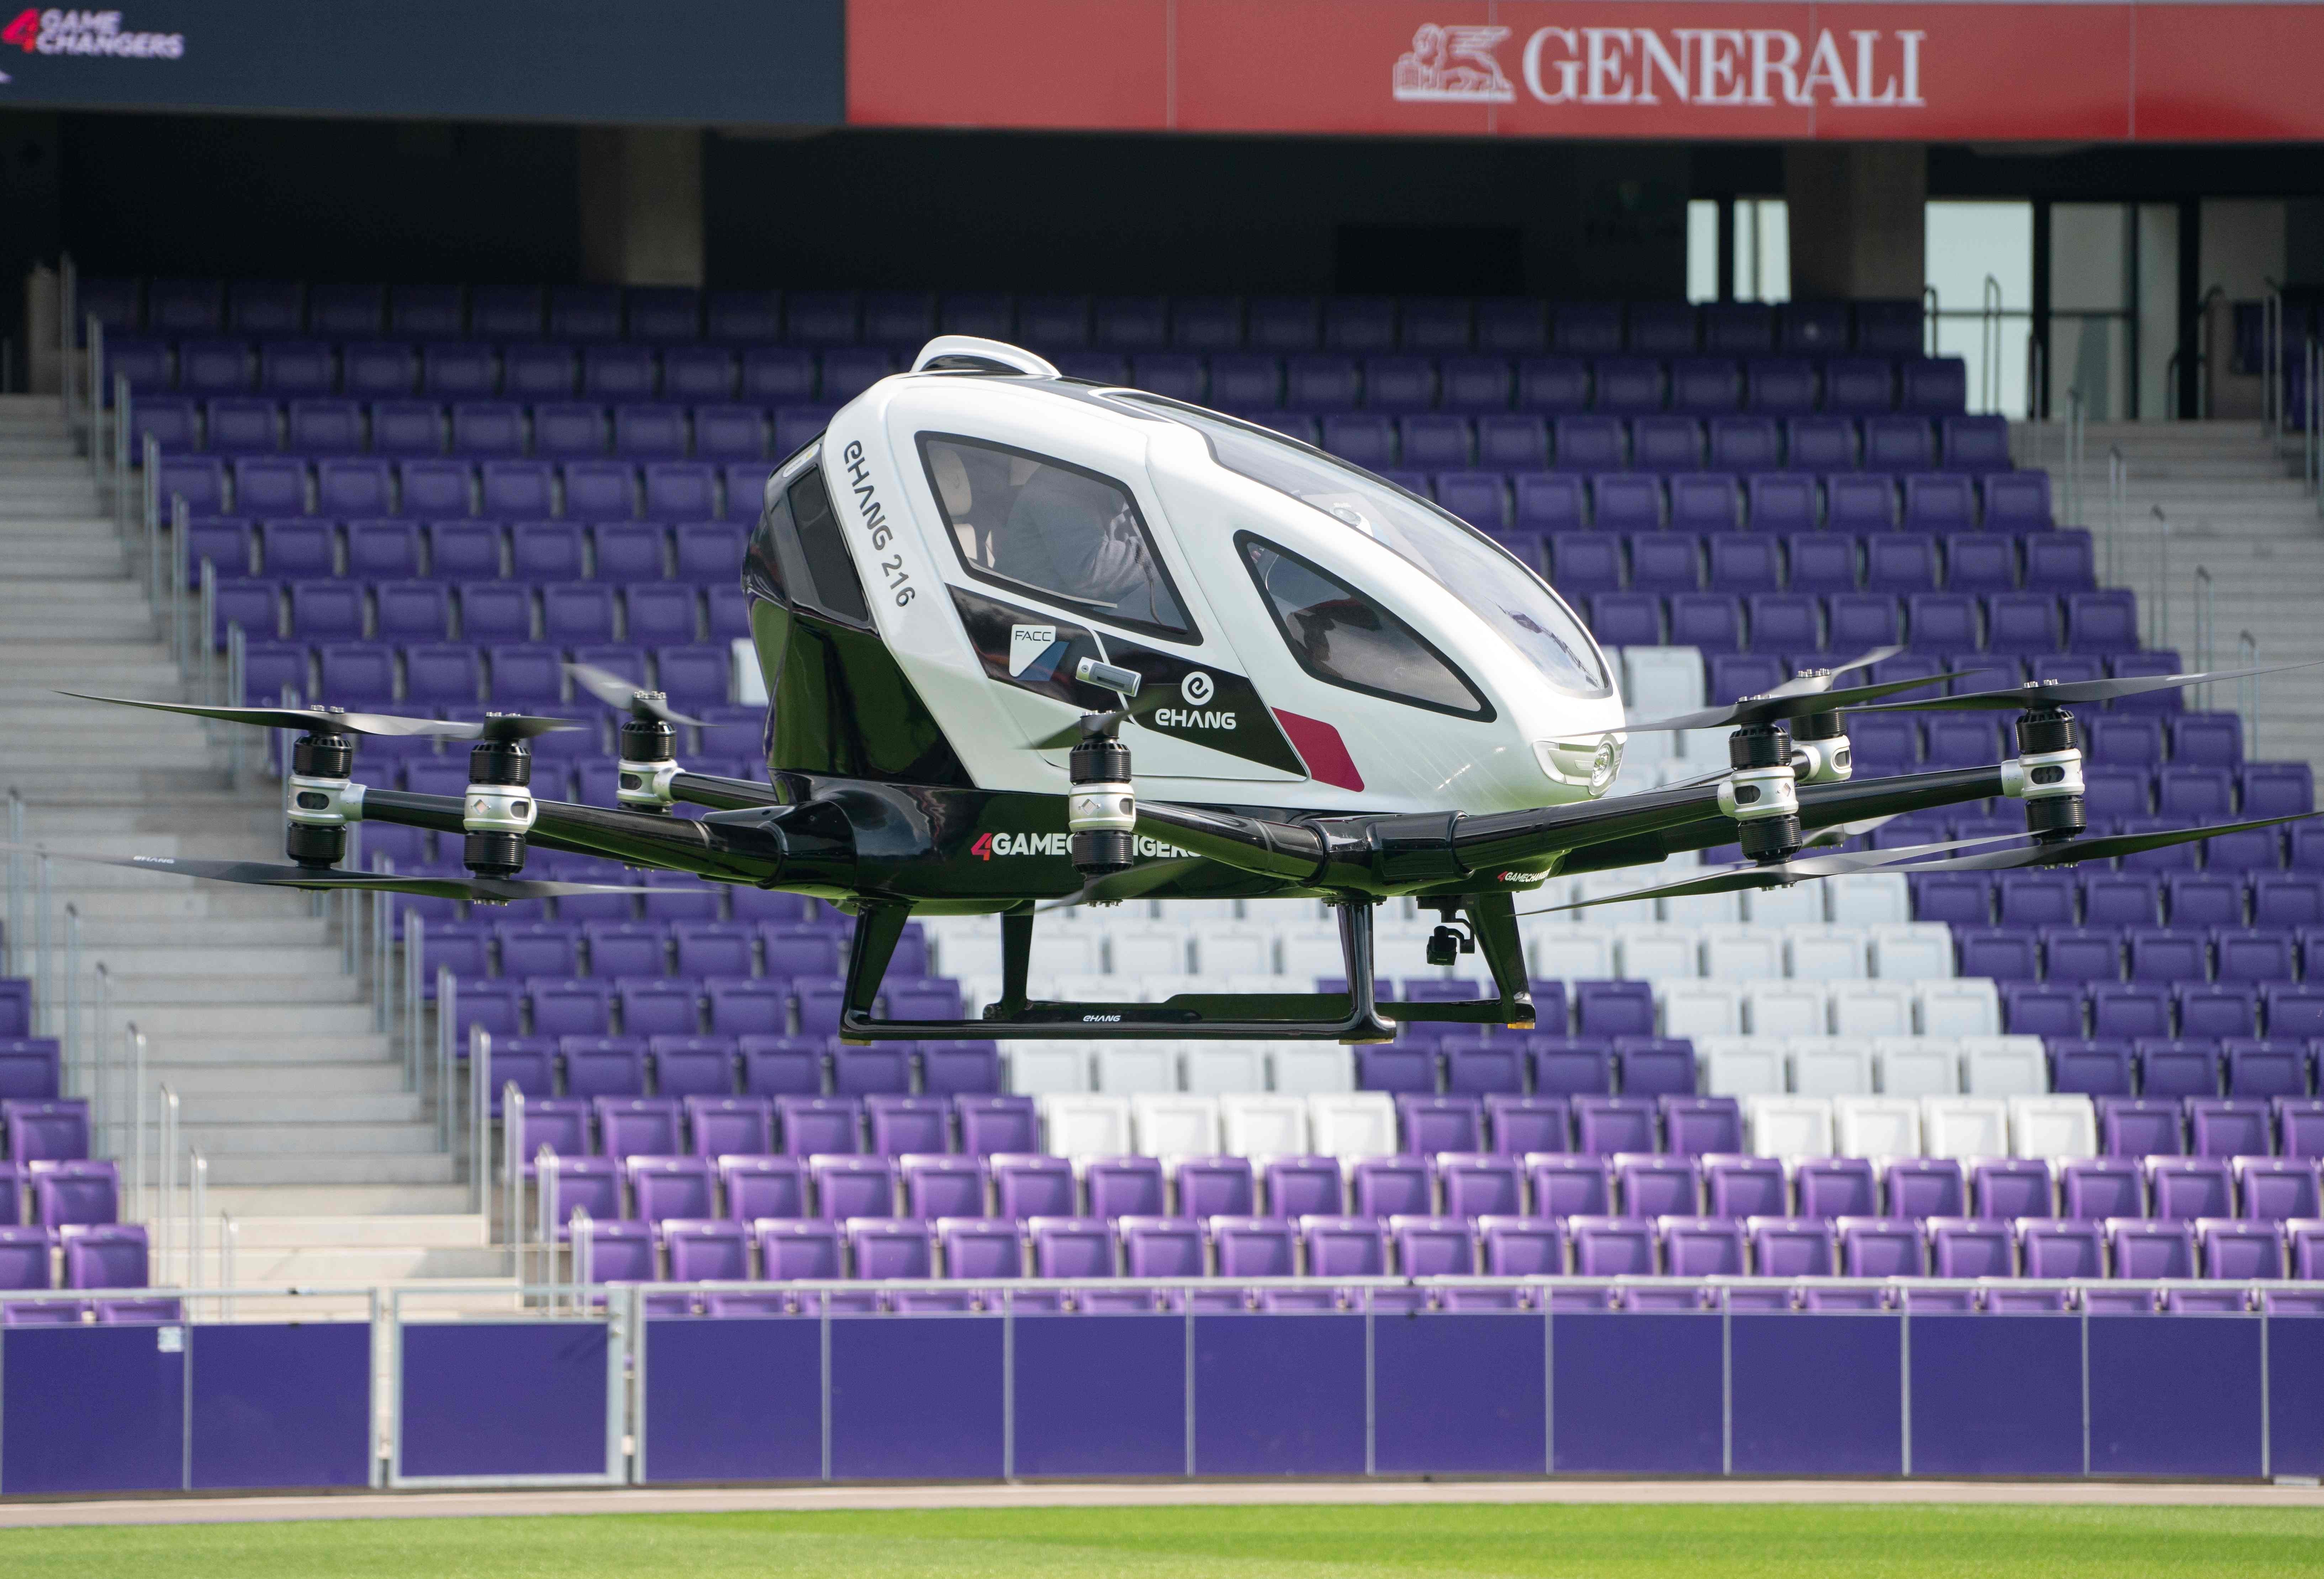 The two-seater EHang 216, an electric-powered autonomous flying taxi, takes a short flight during its launch in April this year at Generali Arena in Vienna, Austria. Photo: Agence France-Presse